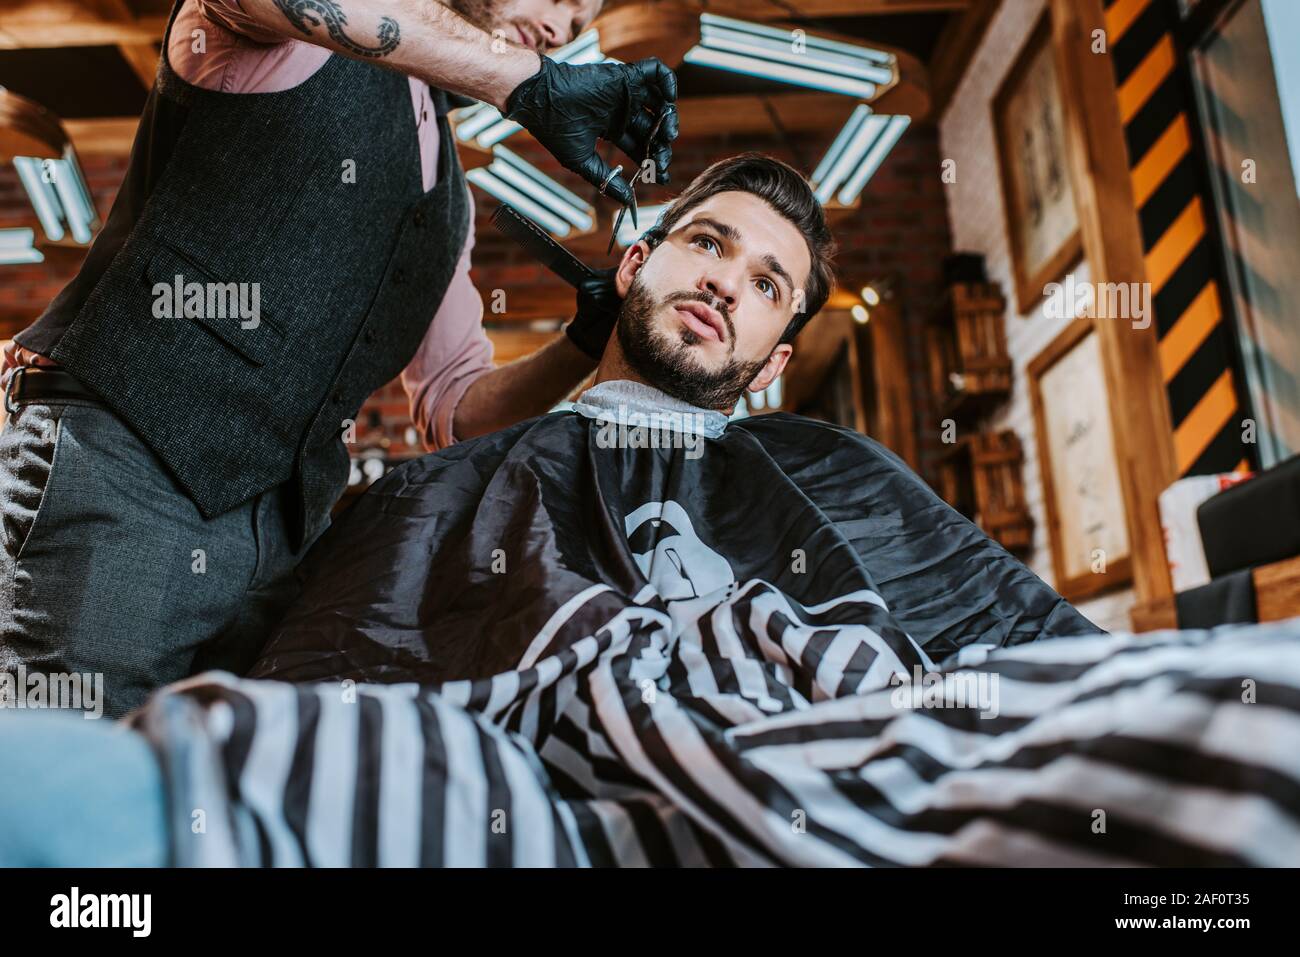 low angle view of tattooed barber in latex gloves holding scissors while styling hair of man Stock Photo